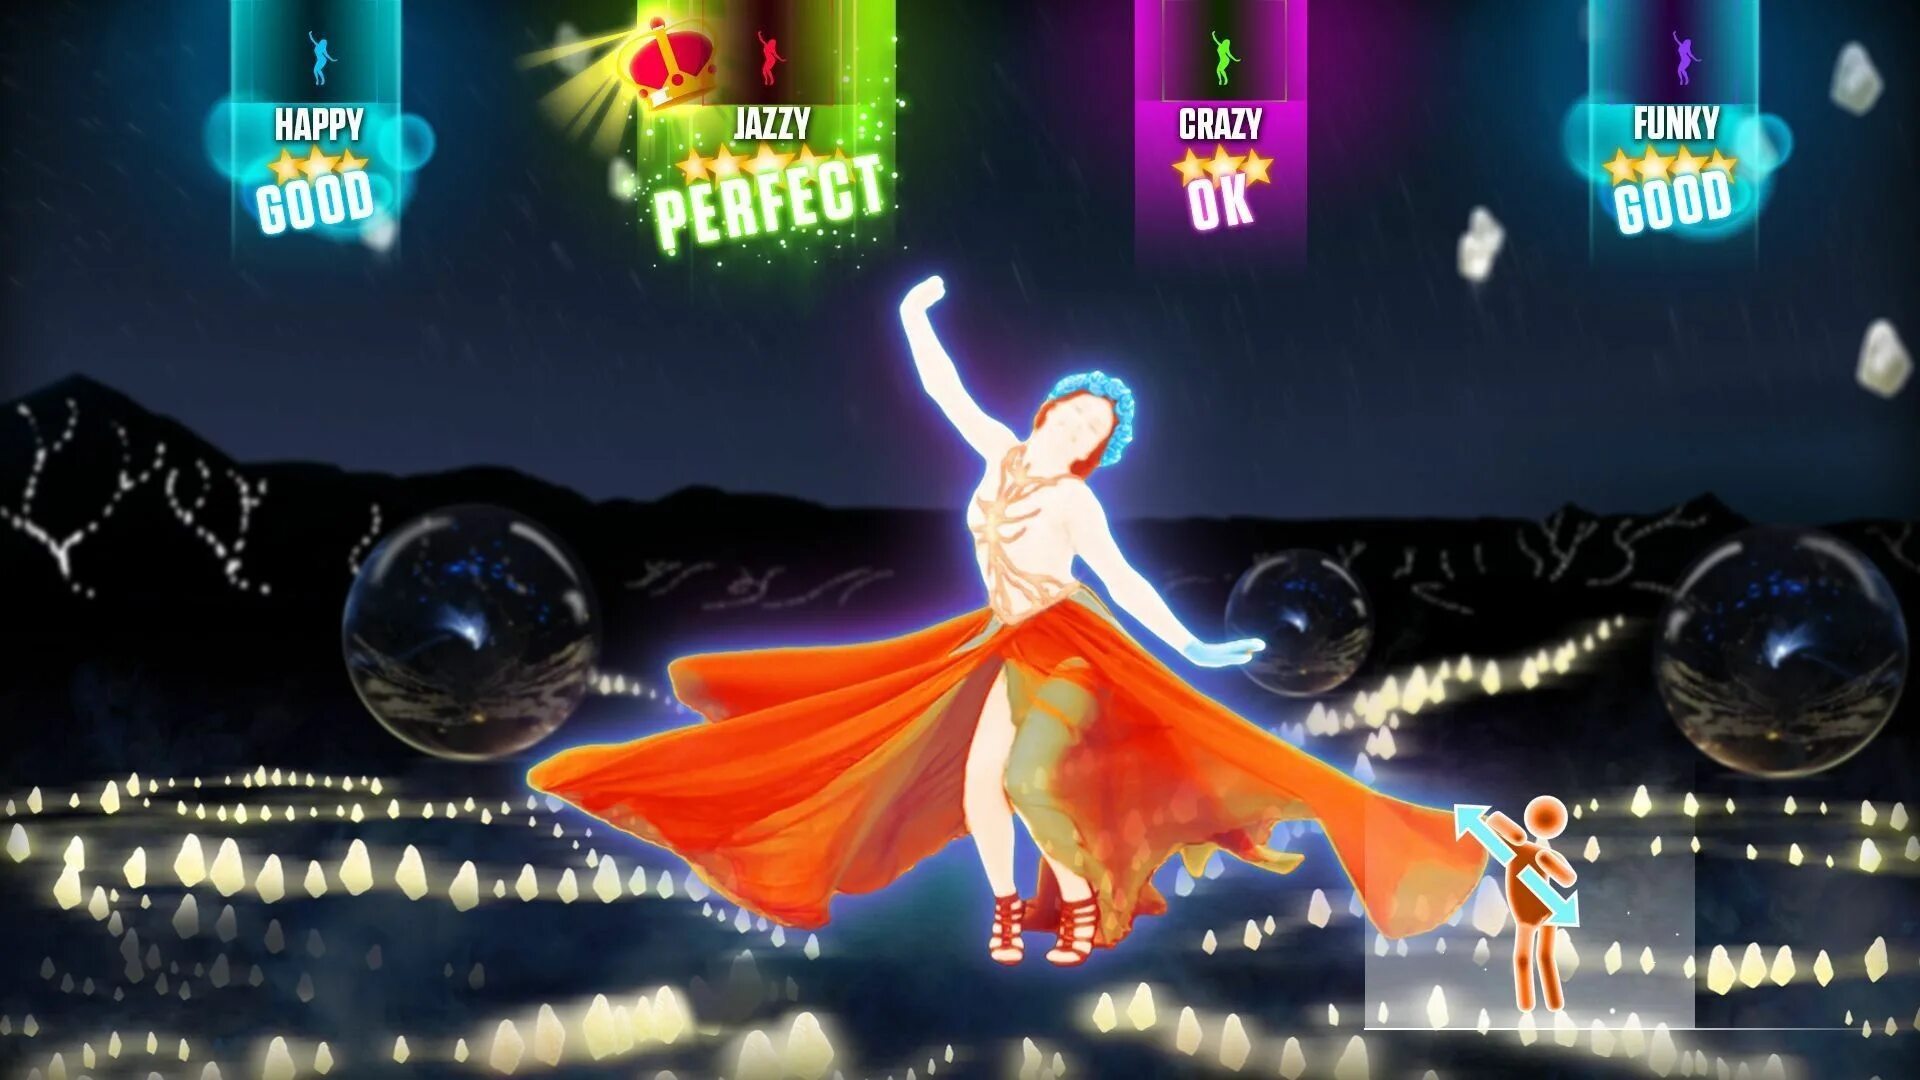 Just Dance 3 Xbox 360. Just Dance 2015. Just Dance 1.